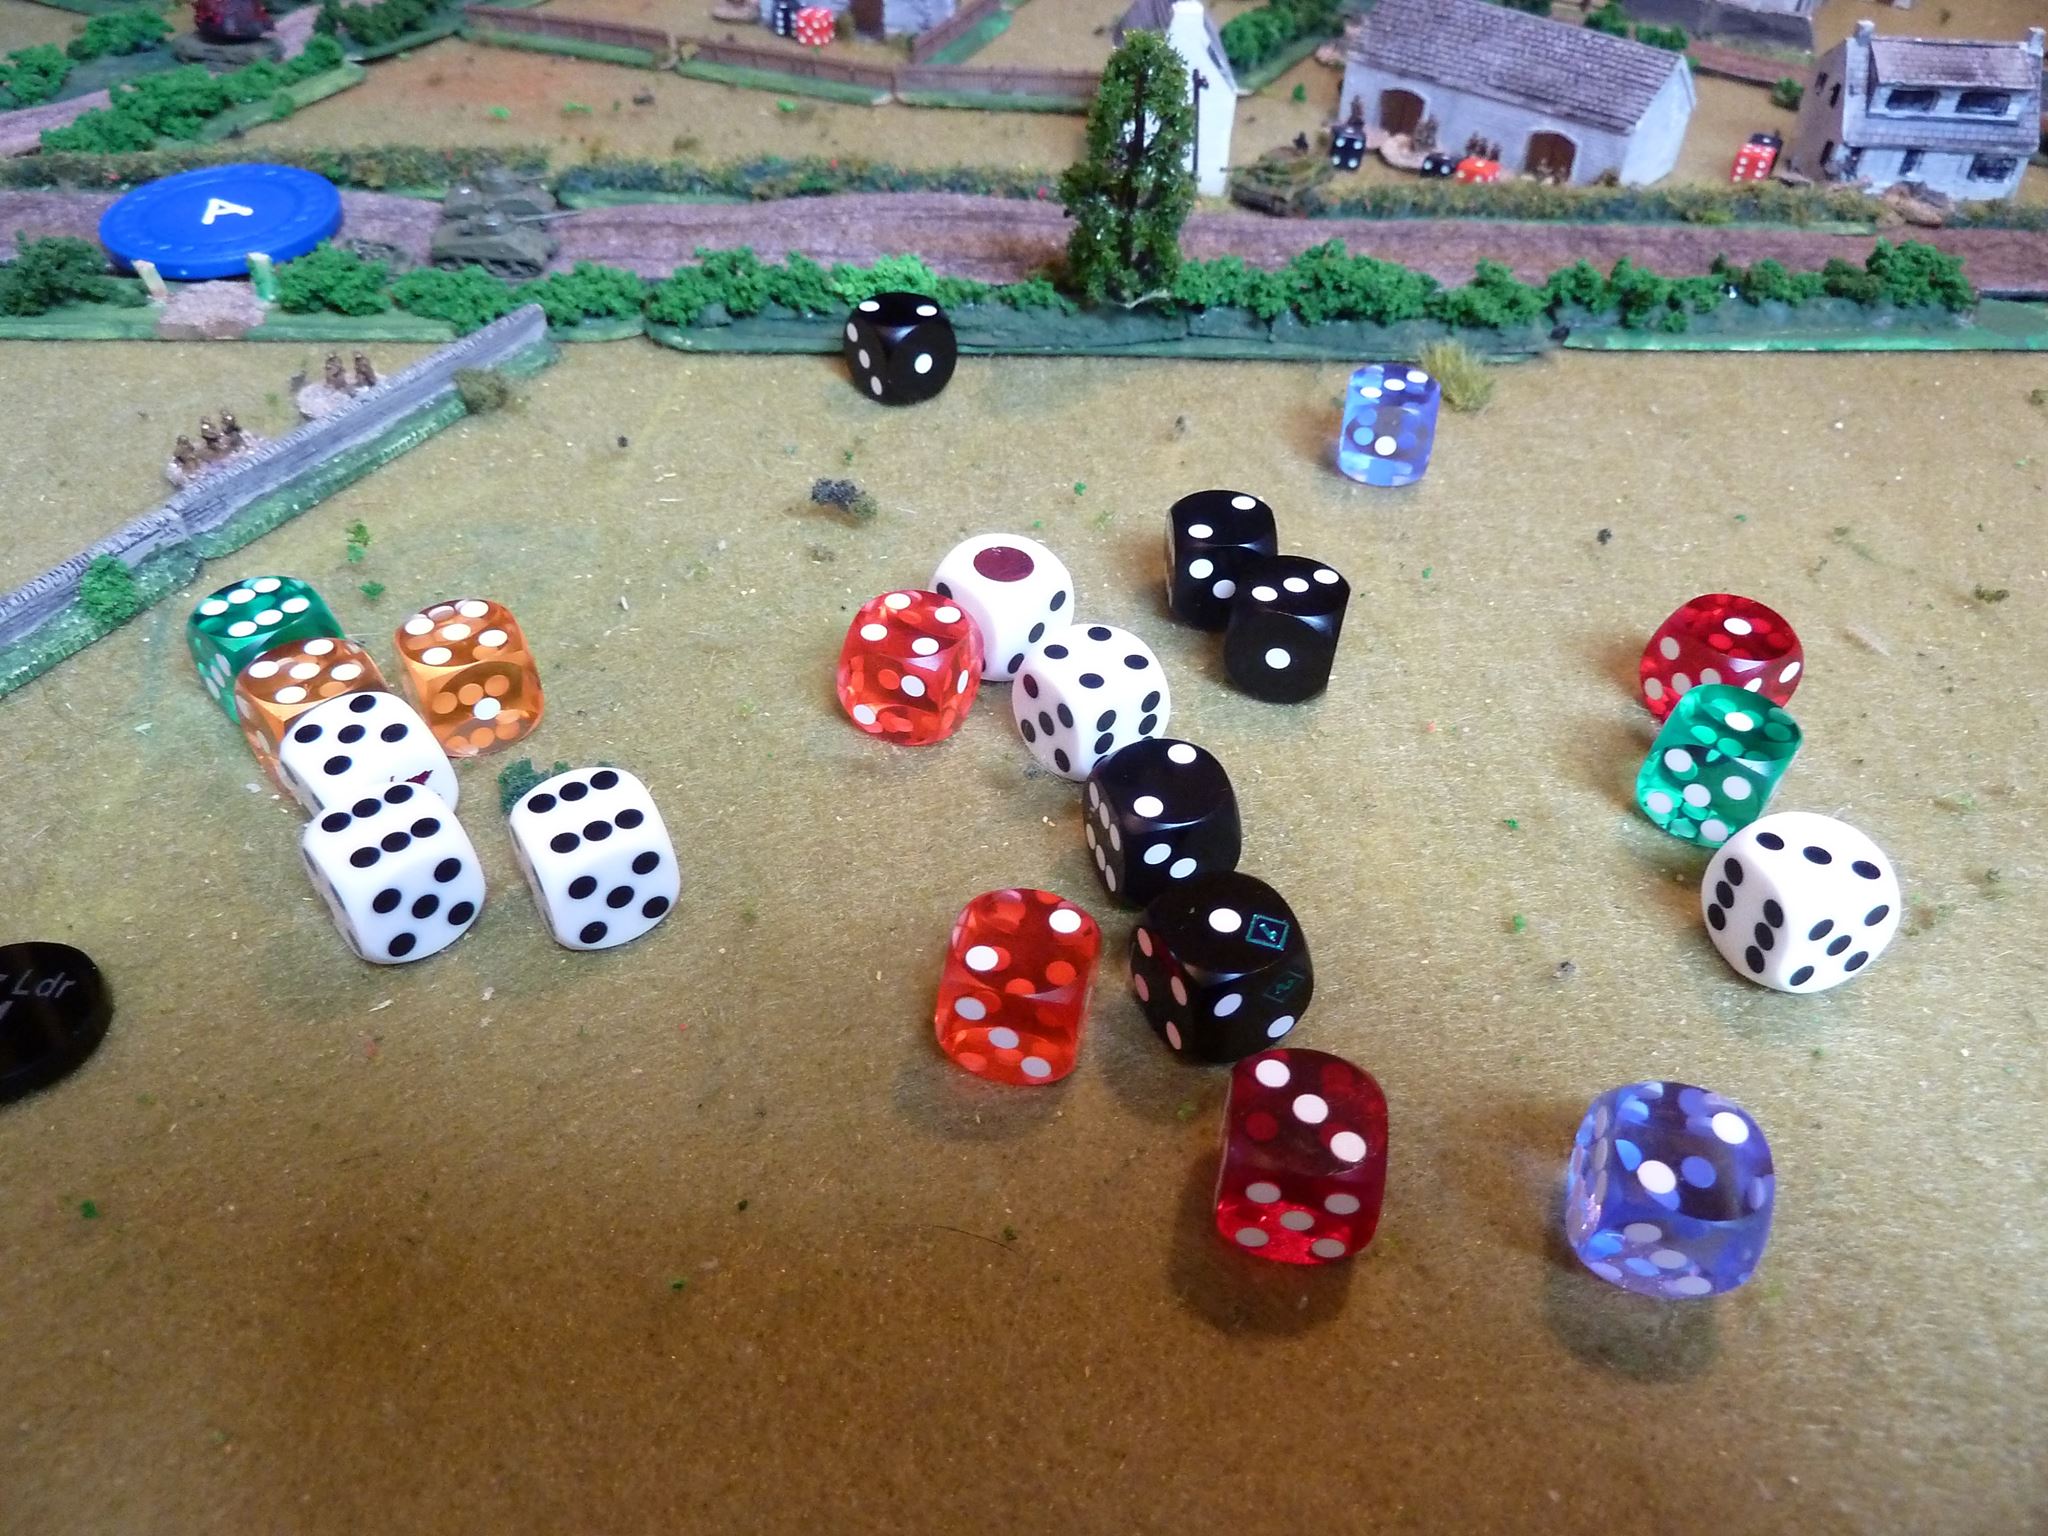     However, despite all those kill dice including three added for the critical hit, the Sherman survives with no effect! 